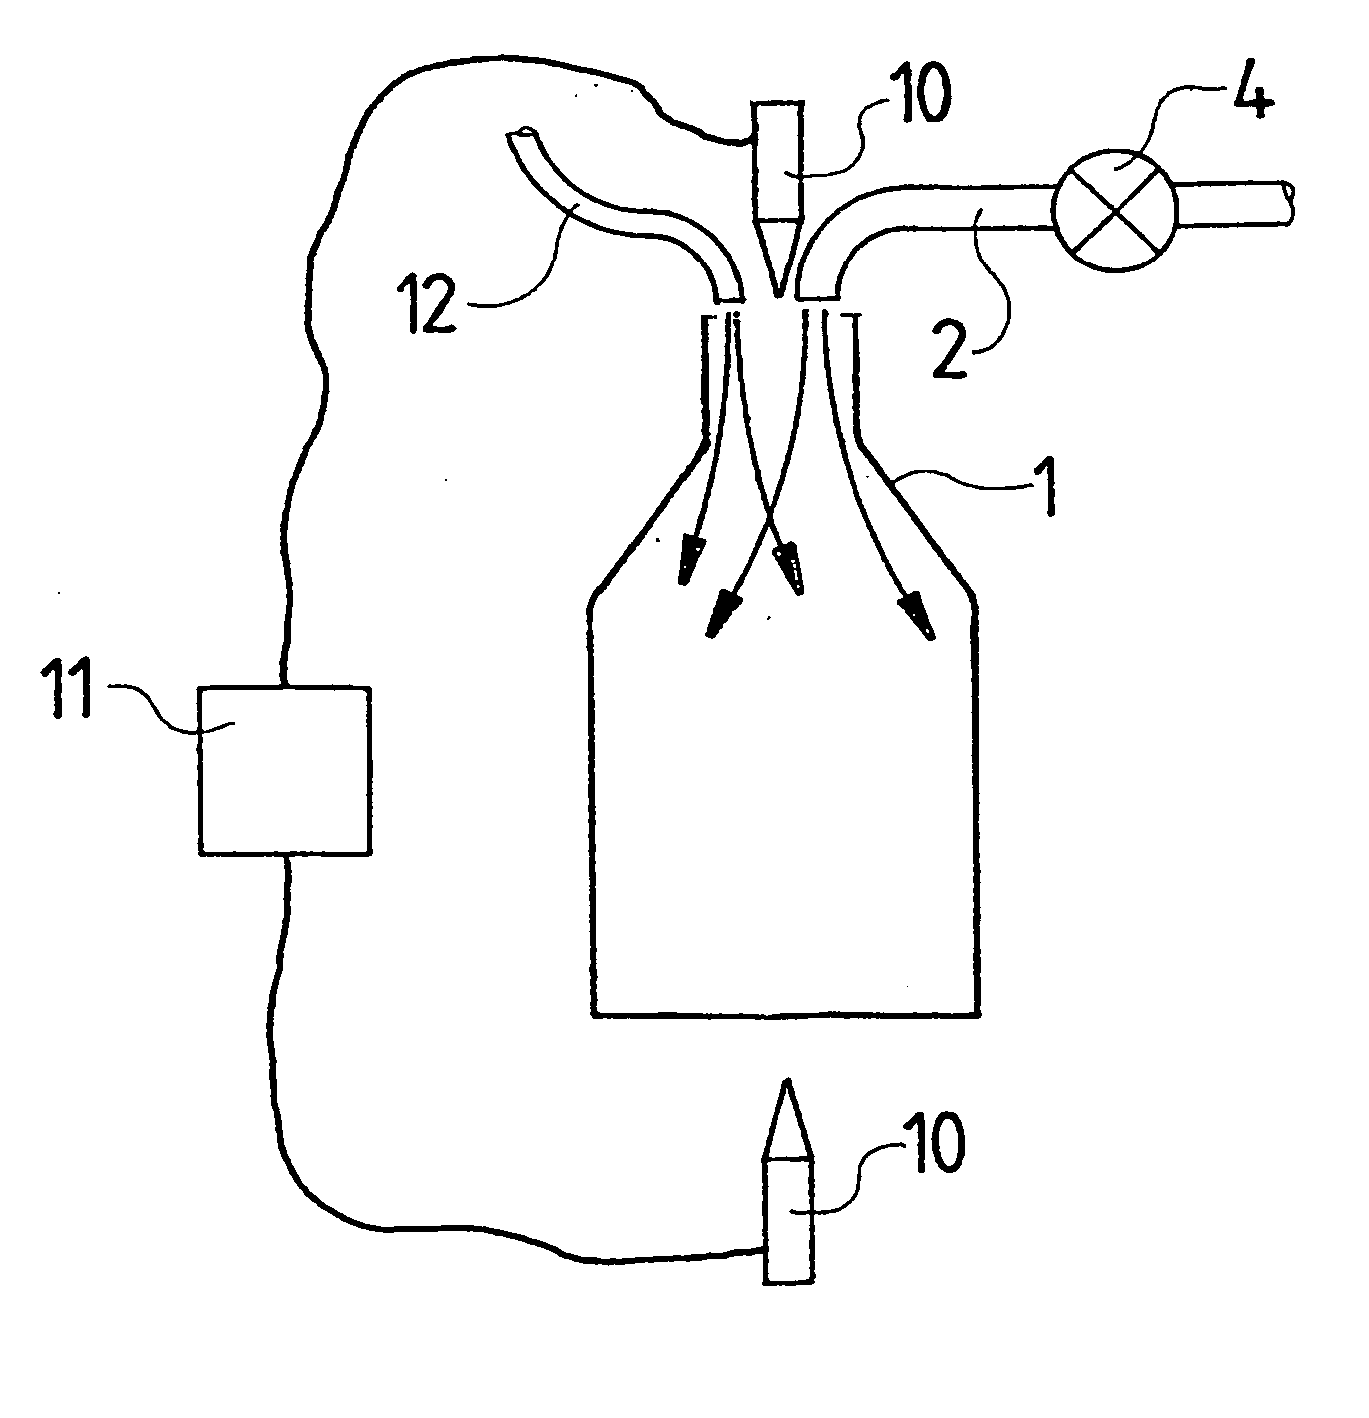 Device for removing oxygen from beverage containers